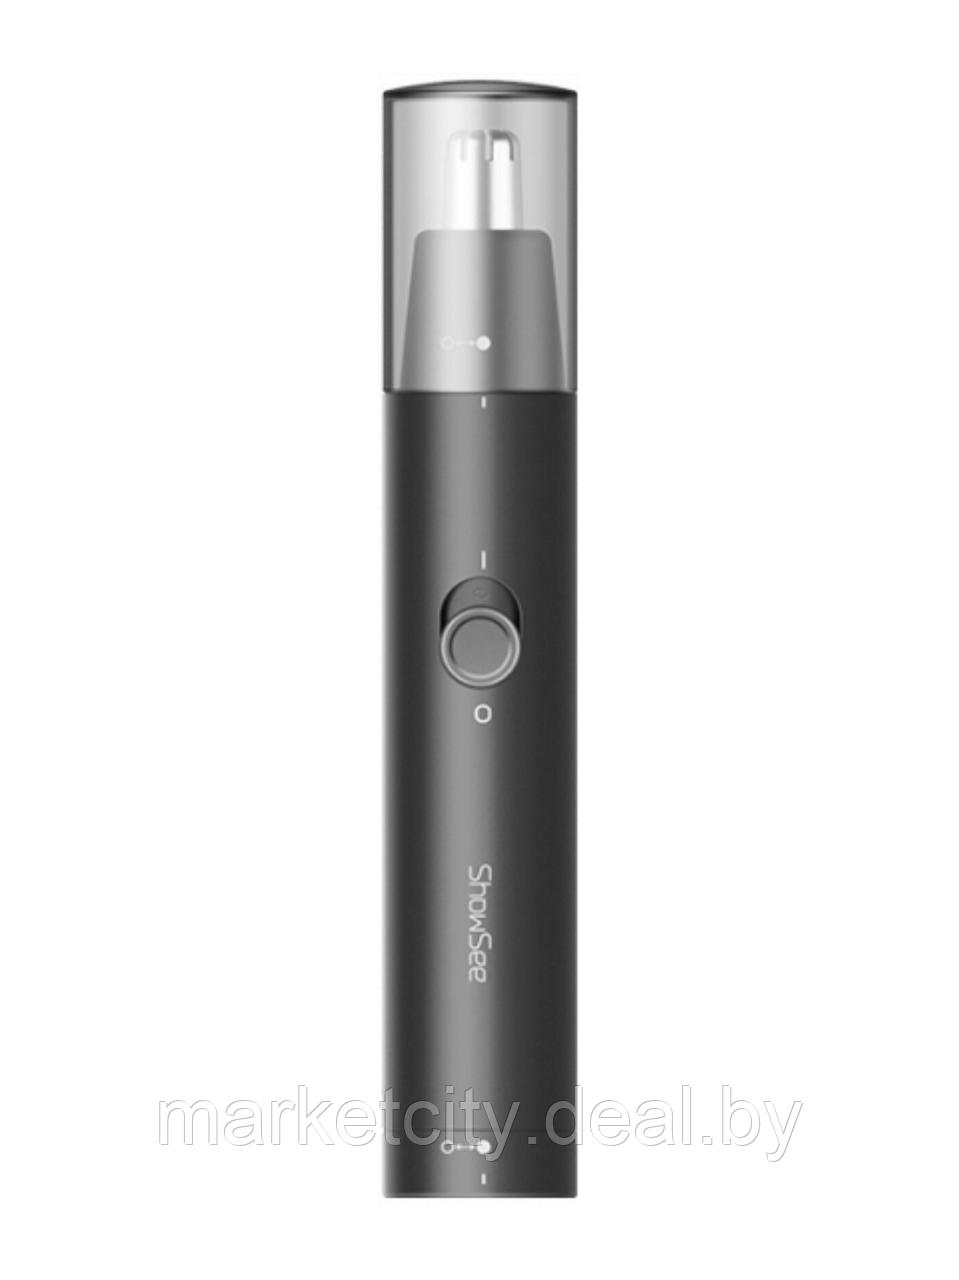 Триммер Xiaomi ShowSee Nose Hair Trimmer C1-BK - фото 2 - id-p143667203